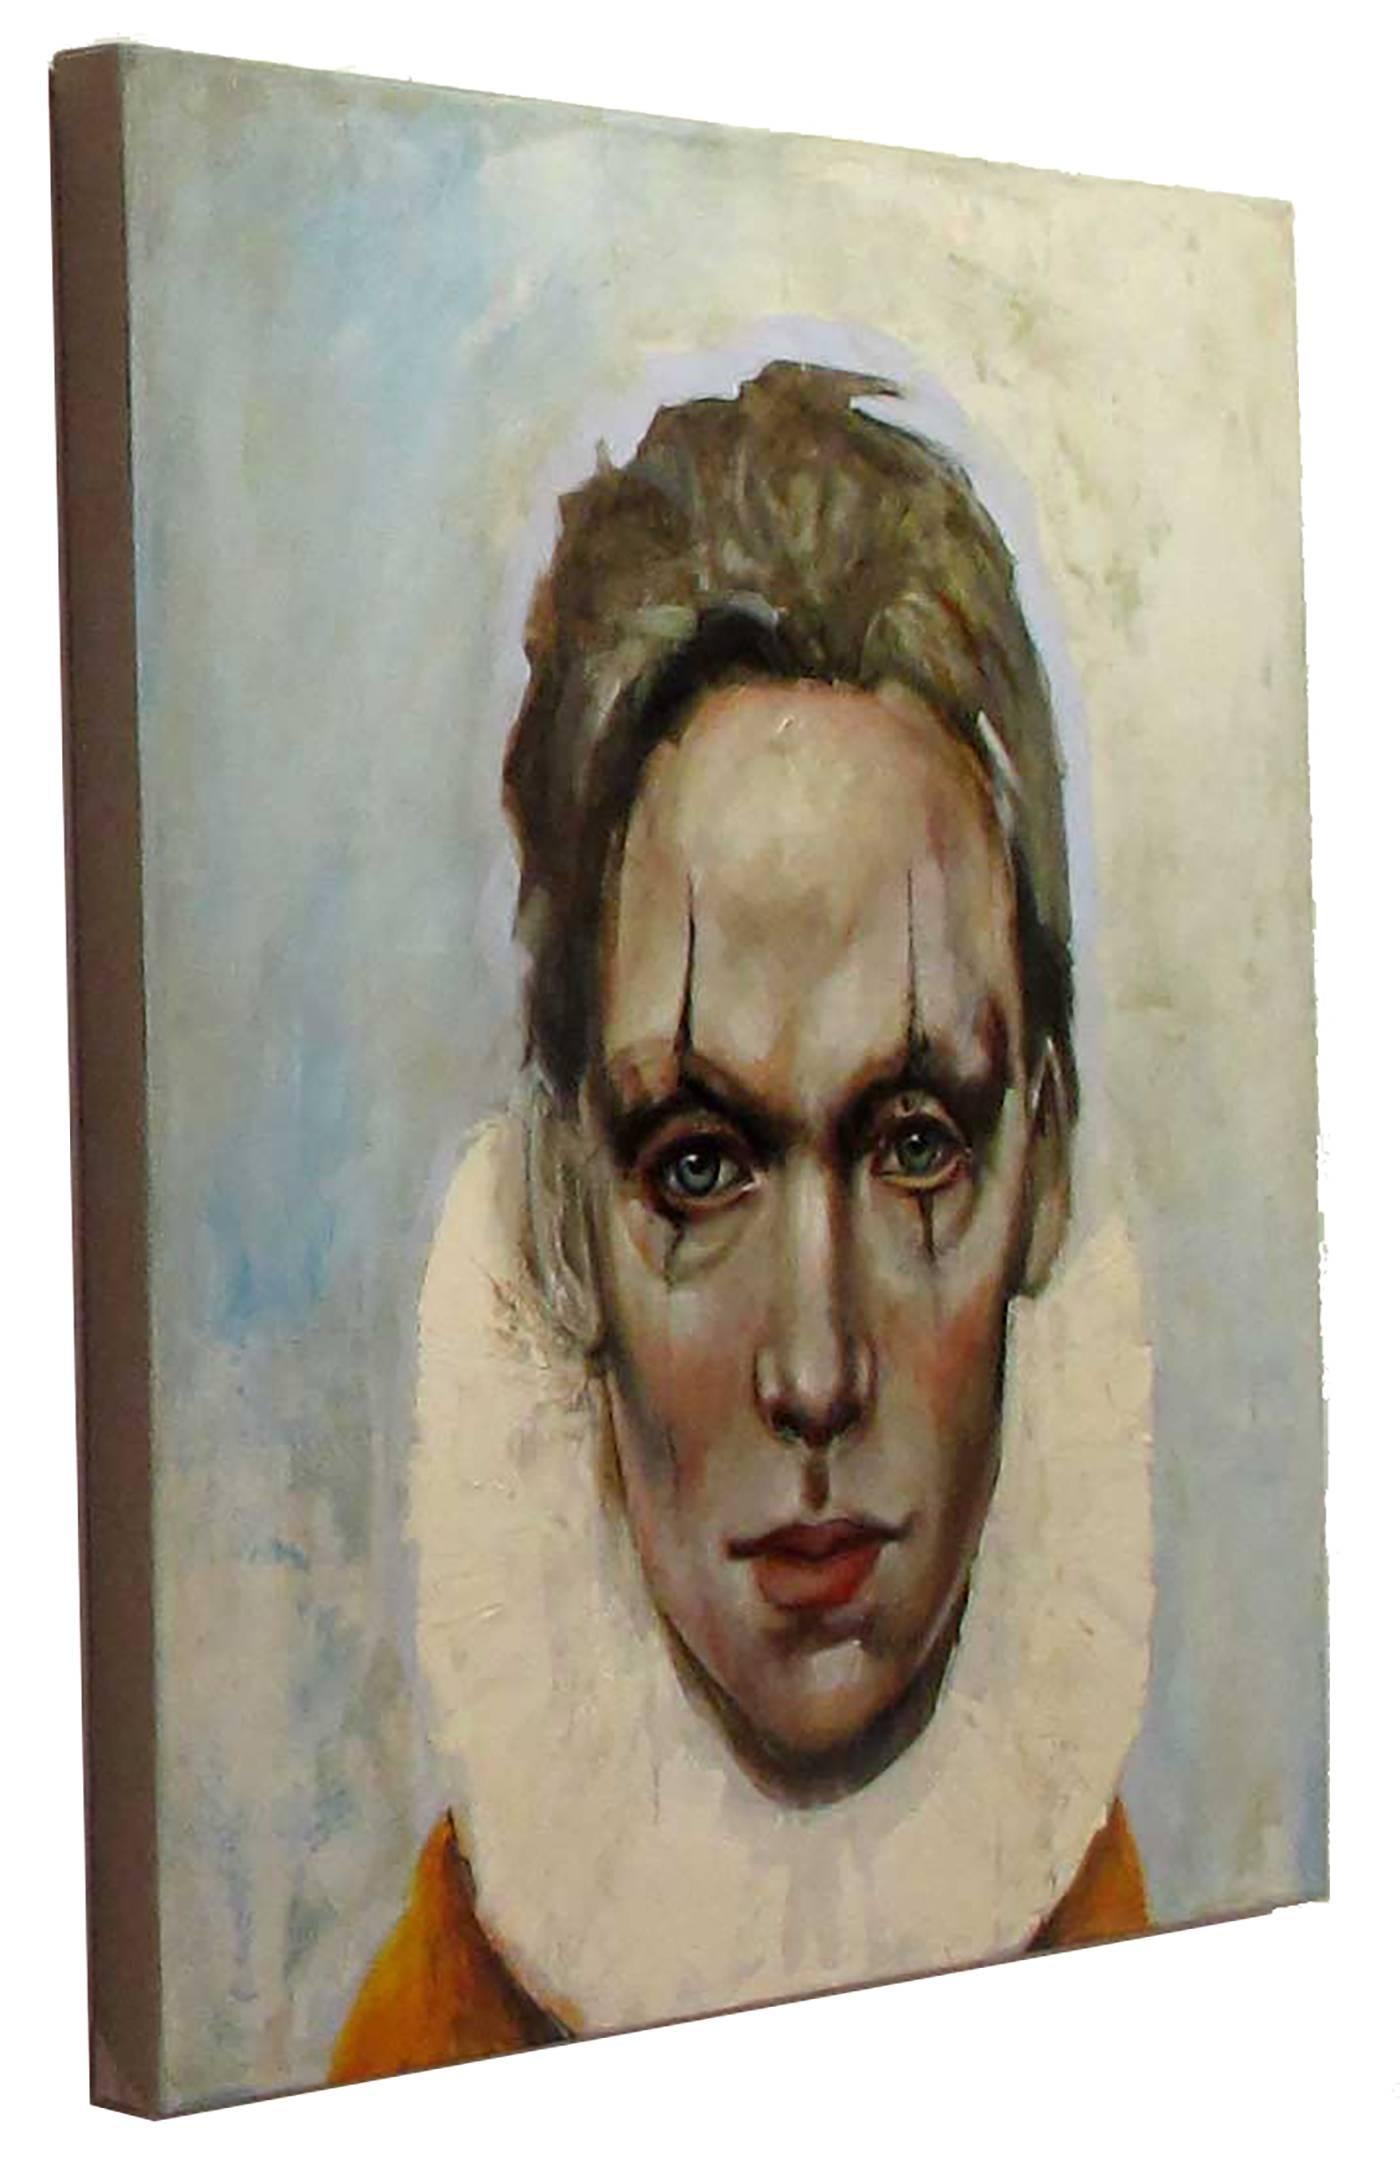 The Second Act, Oil on canvas, Harlequin portrait painting - Painting by Michele Mikesell